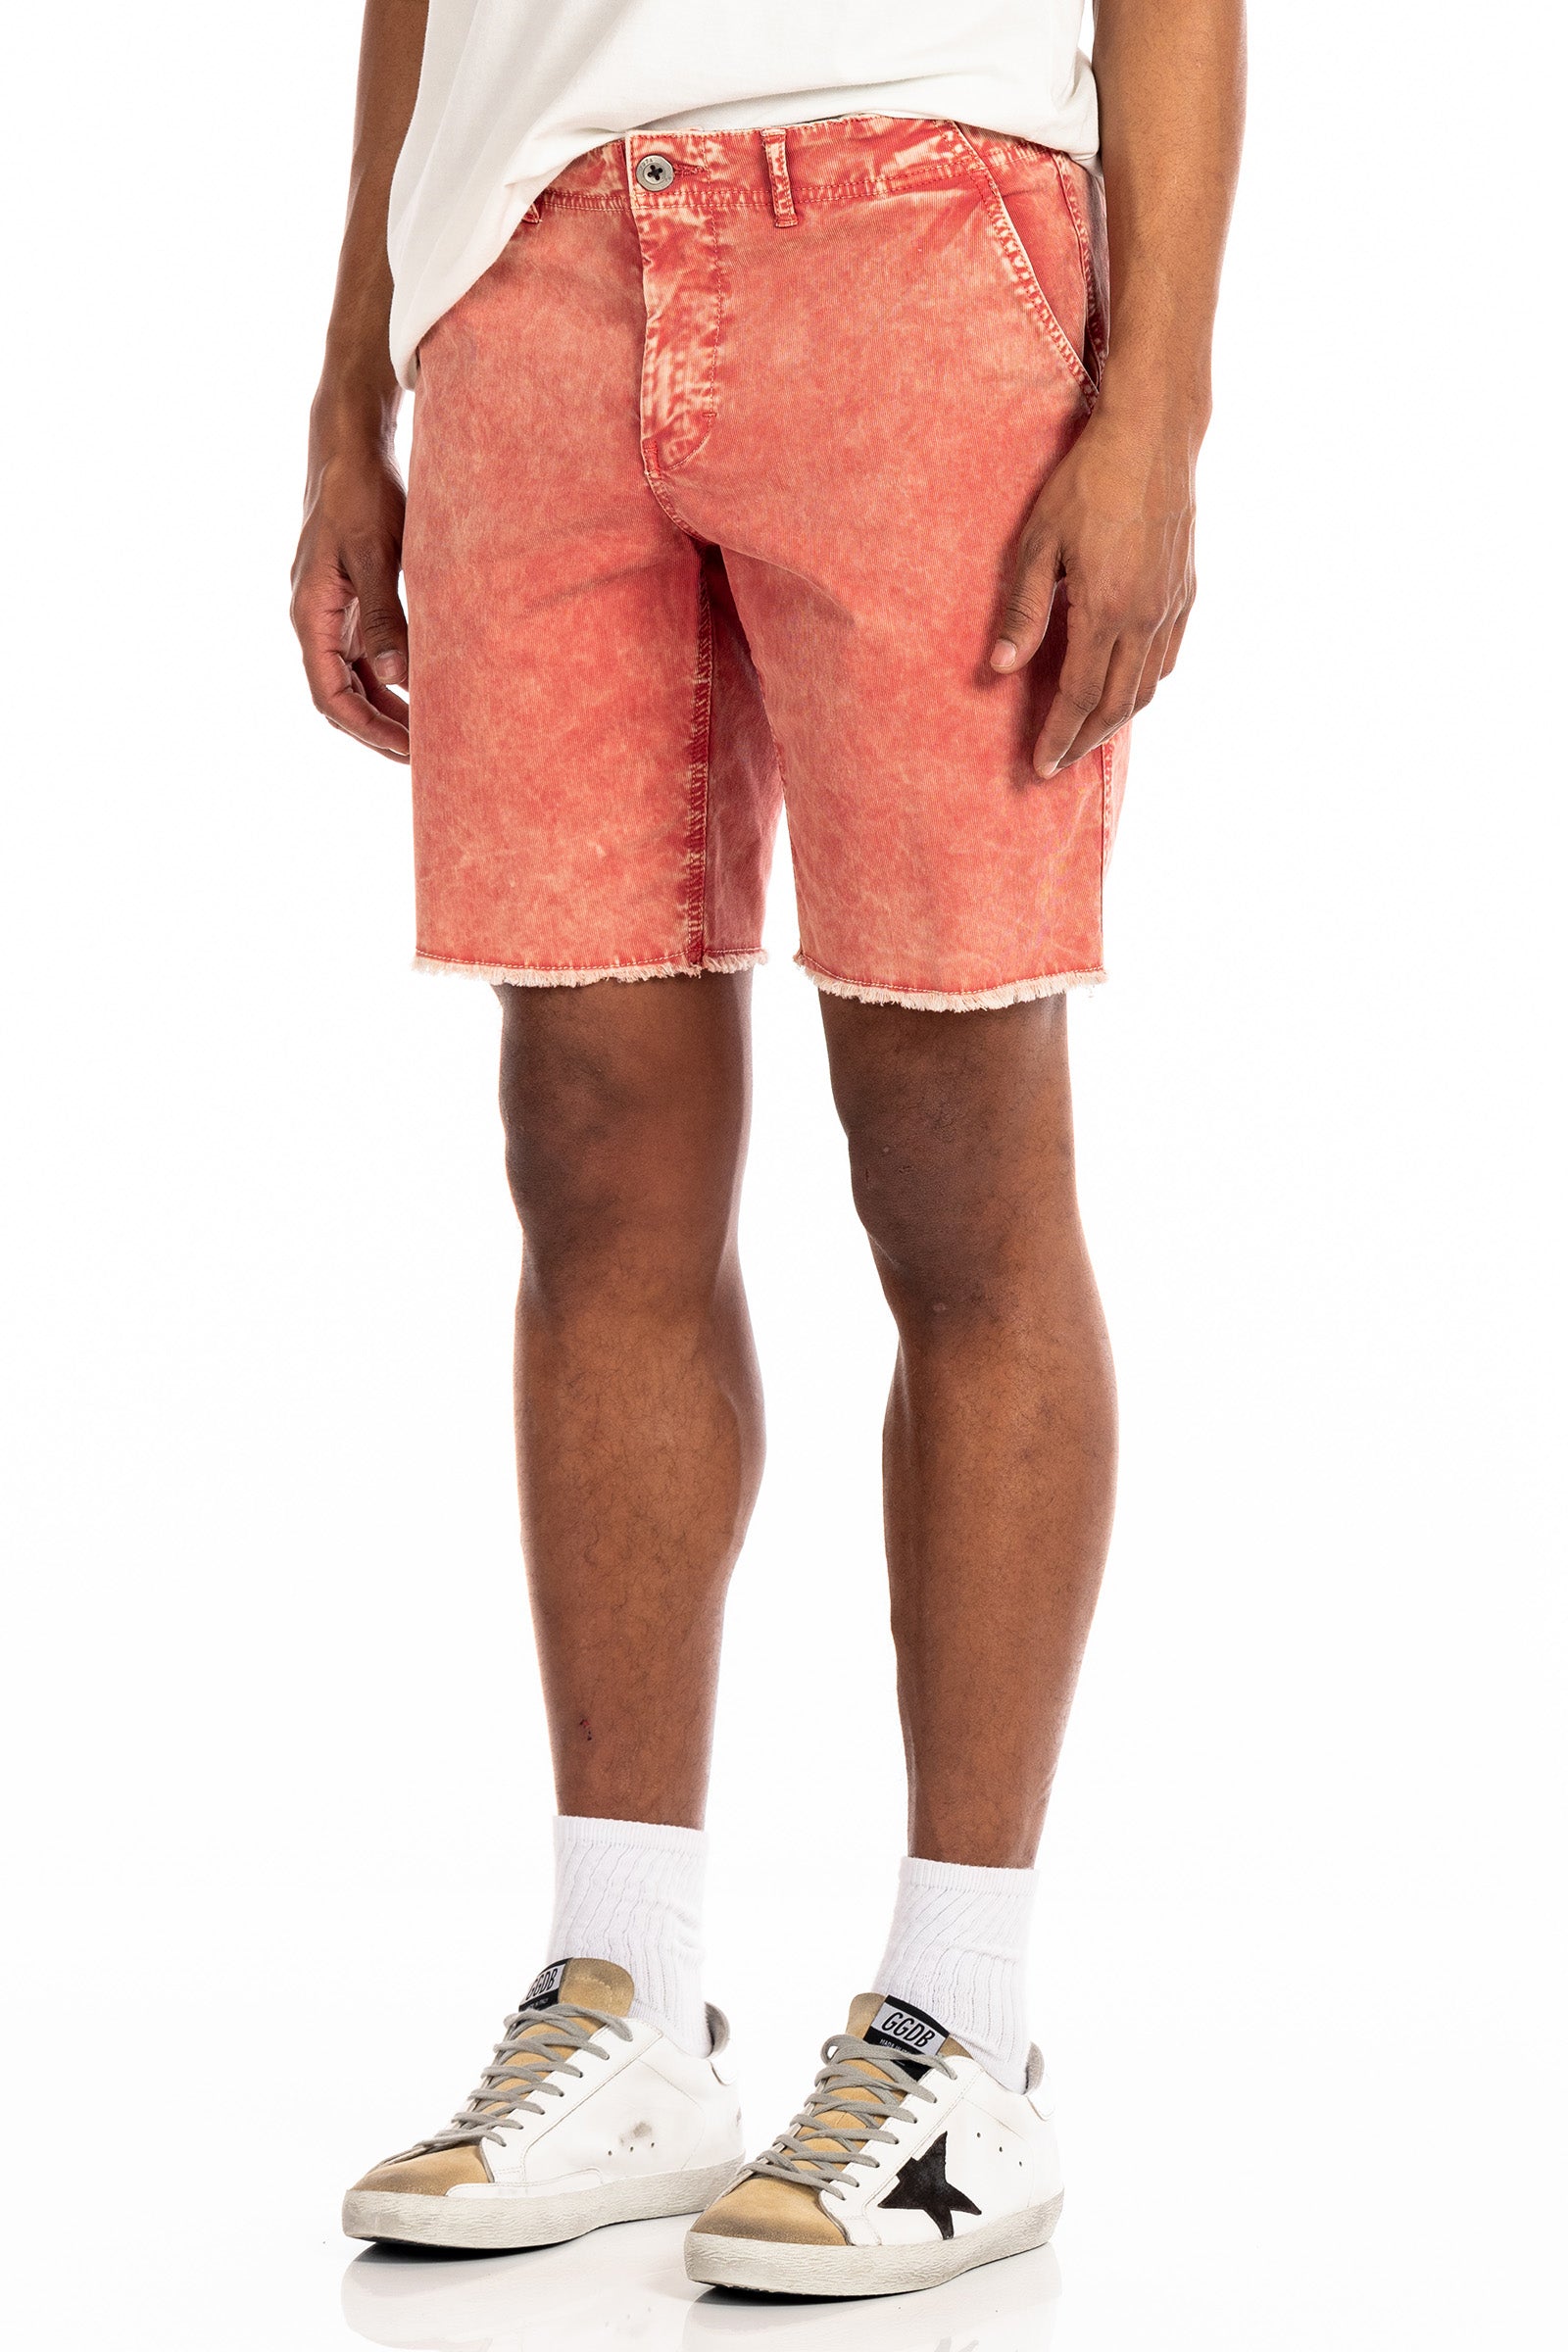 Original Paperbacks Brentwood Mineral Chino Short in Tangerine on Model Cropped Side View